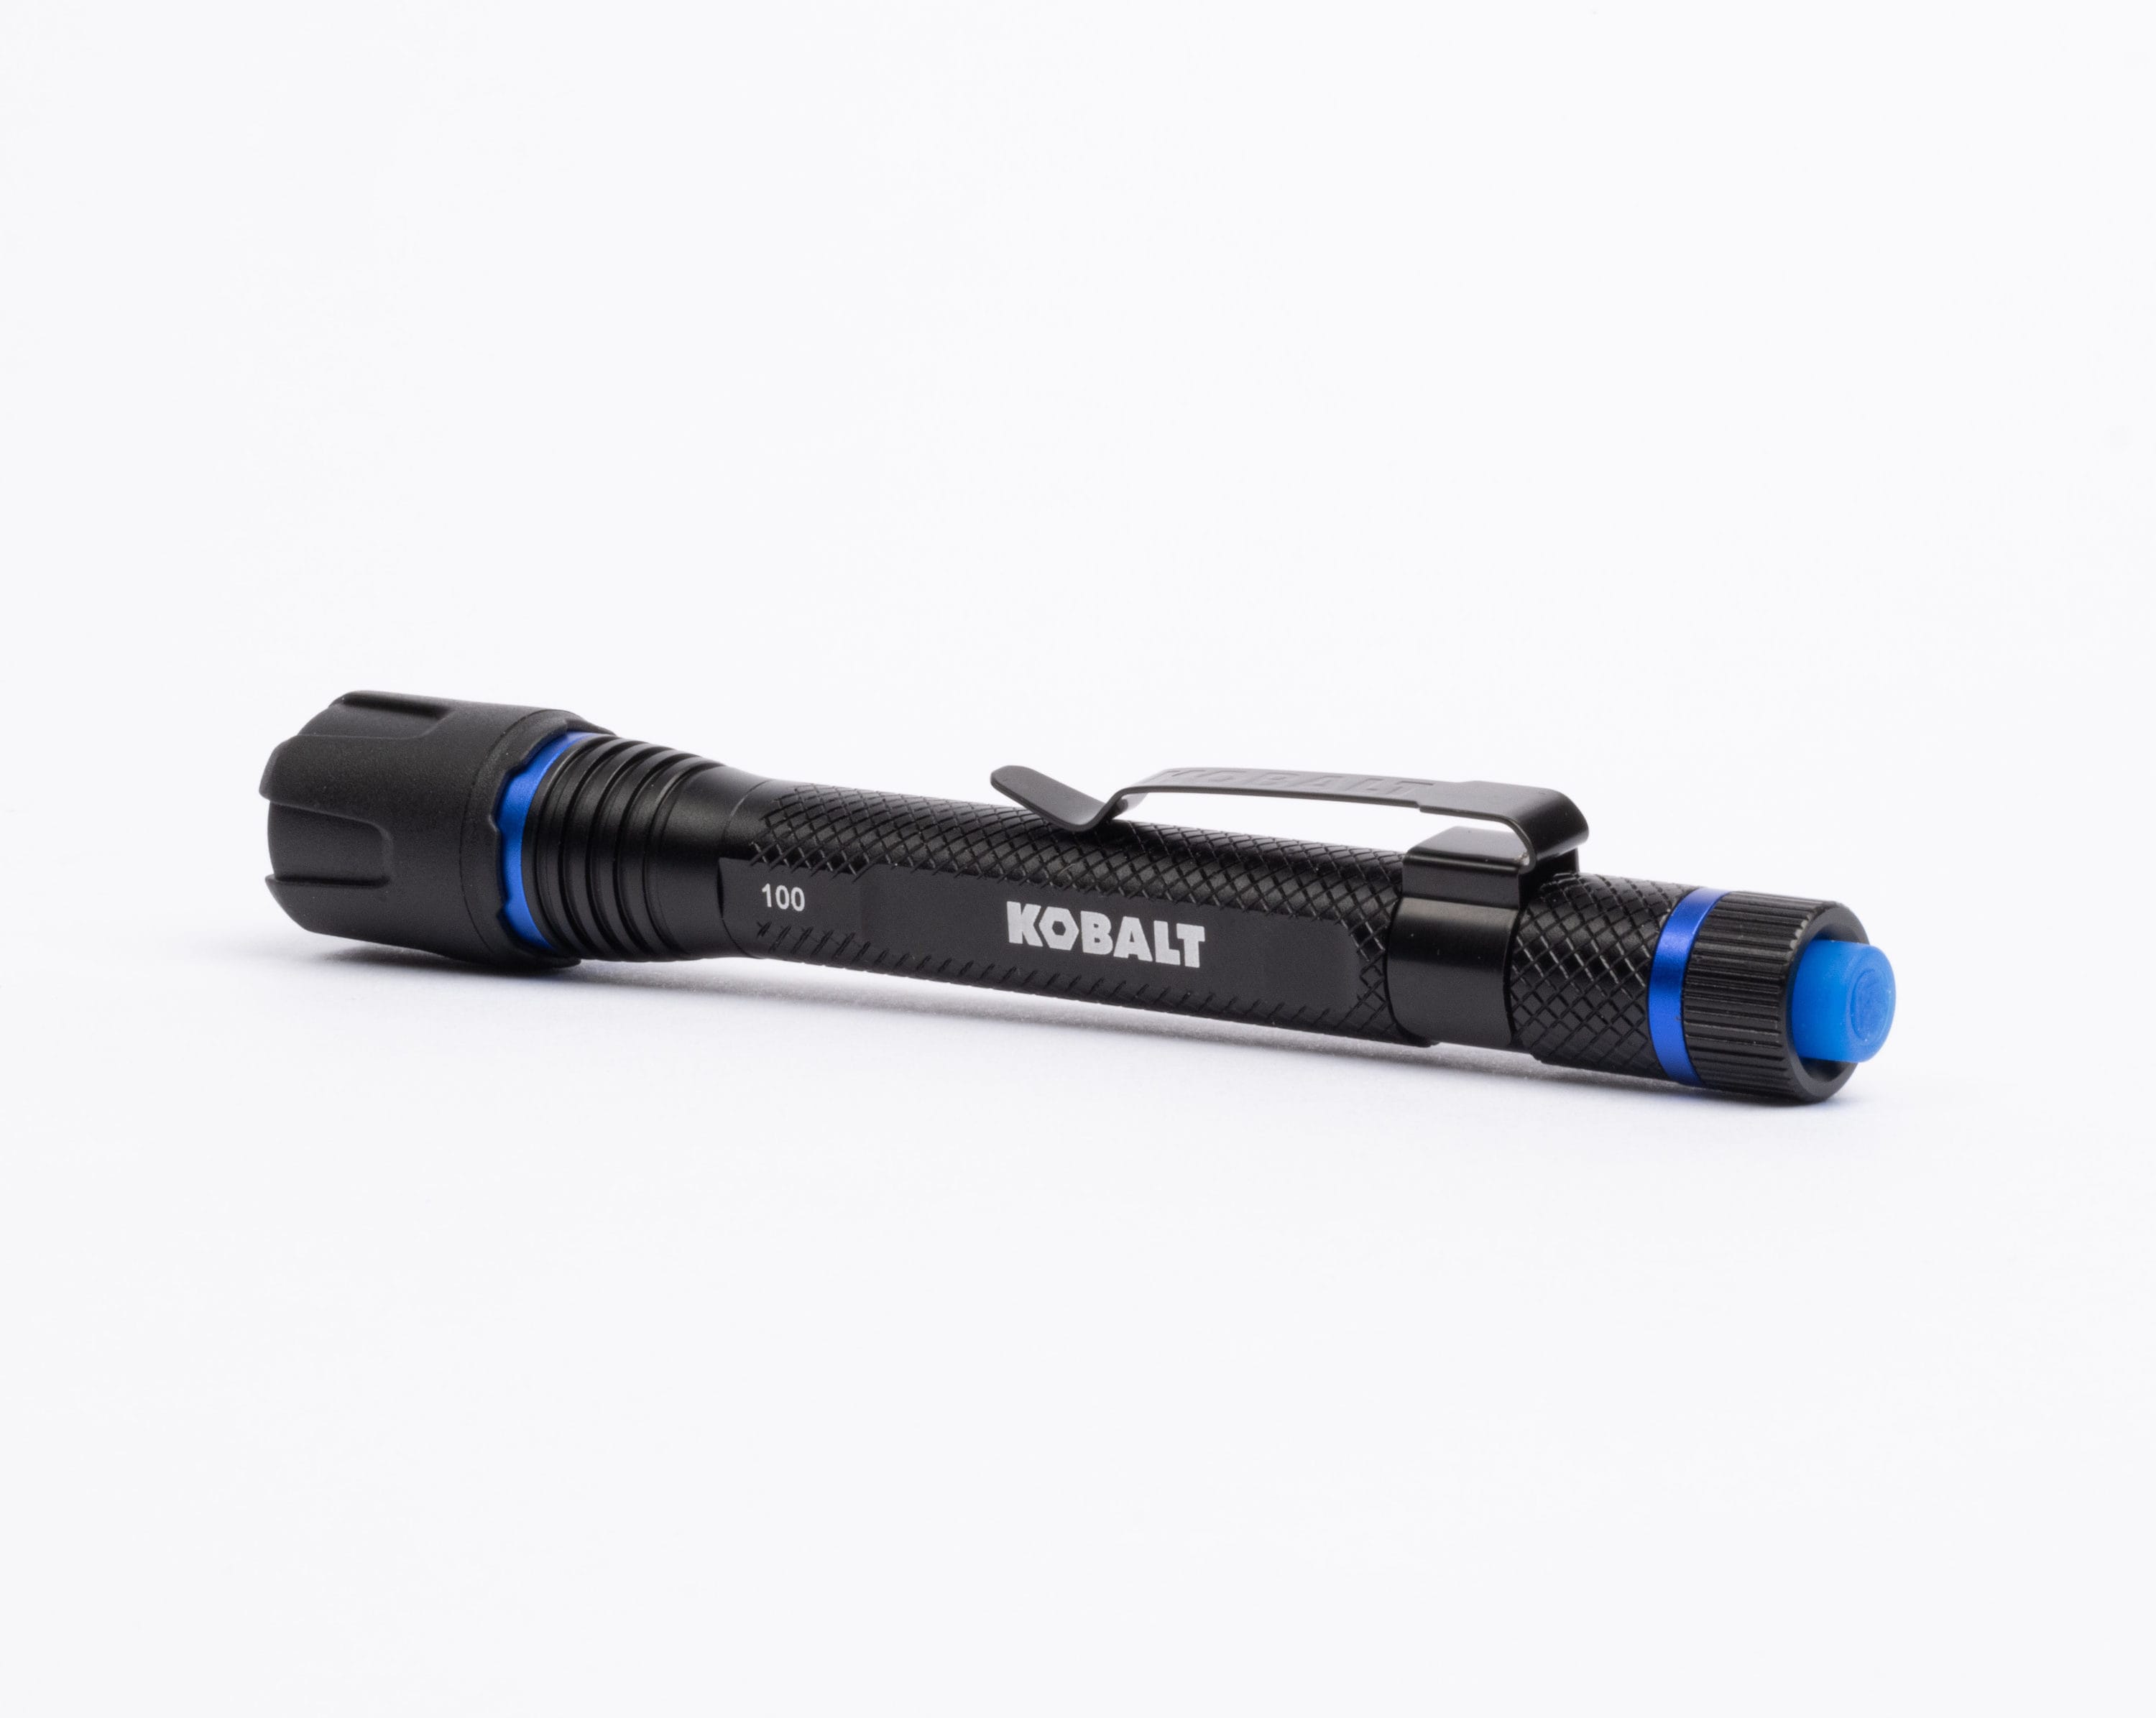 department Included) Kobalt Waterproof 100-Lumen Flashlights 2 Virtually in Indestructible the (AAA at LED Modes Battery Flashlight